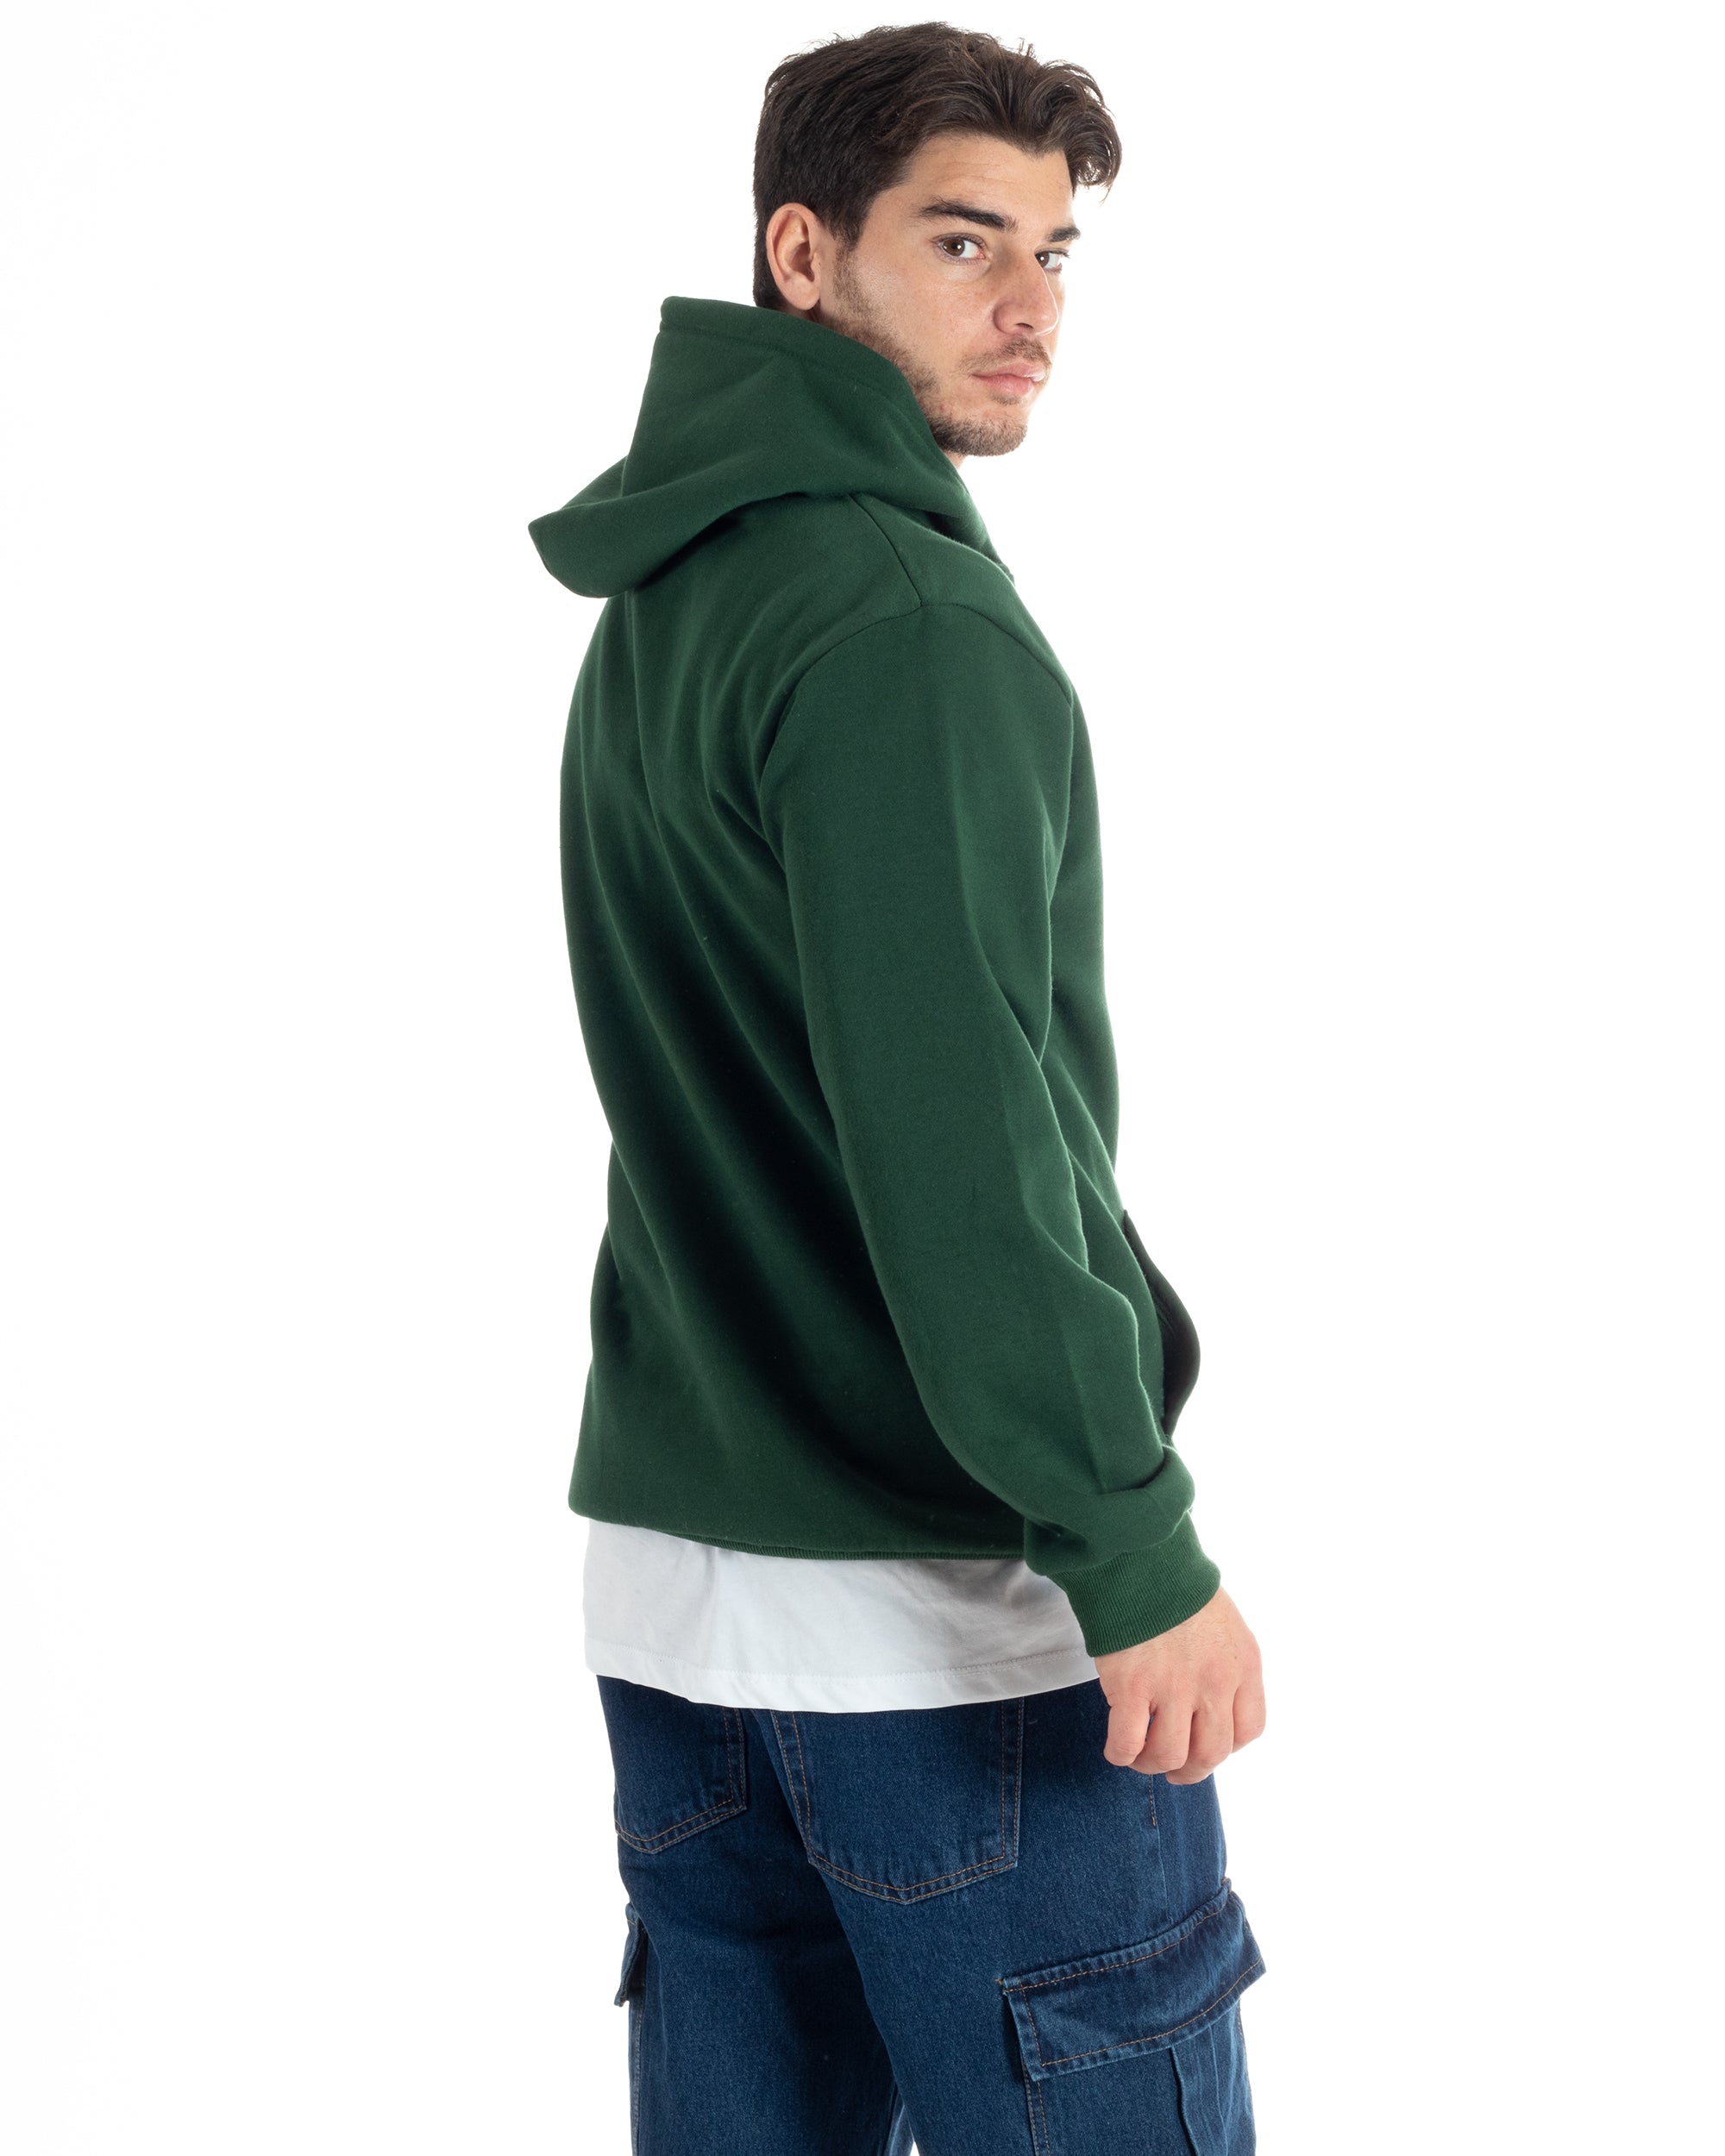 Men's Basic Hoodie Sweatshirt Solid Color Black Comfortable Relaxed Fit GIOSAL-F2956A